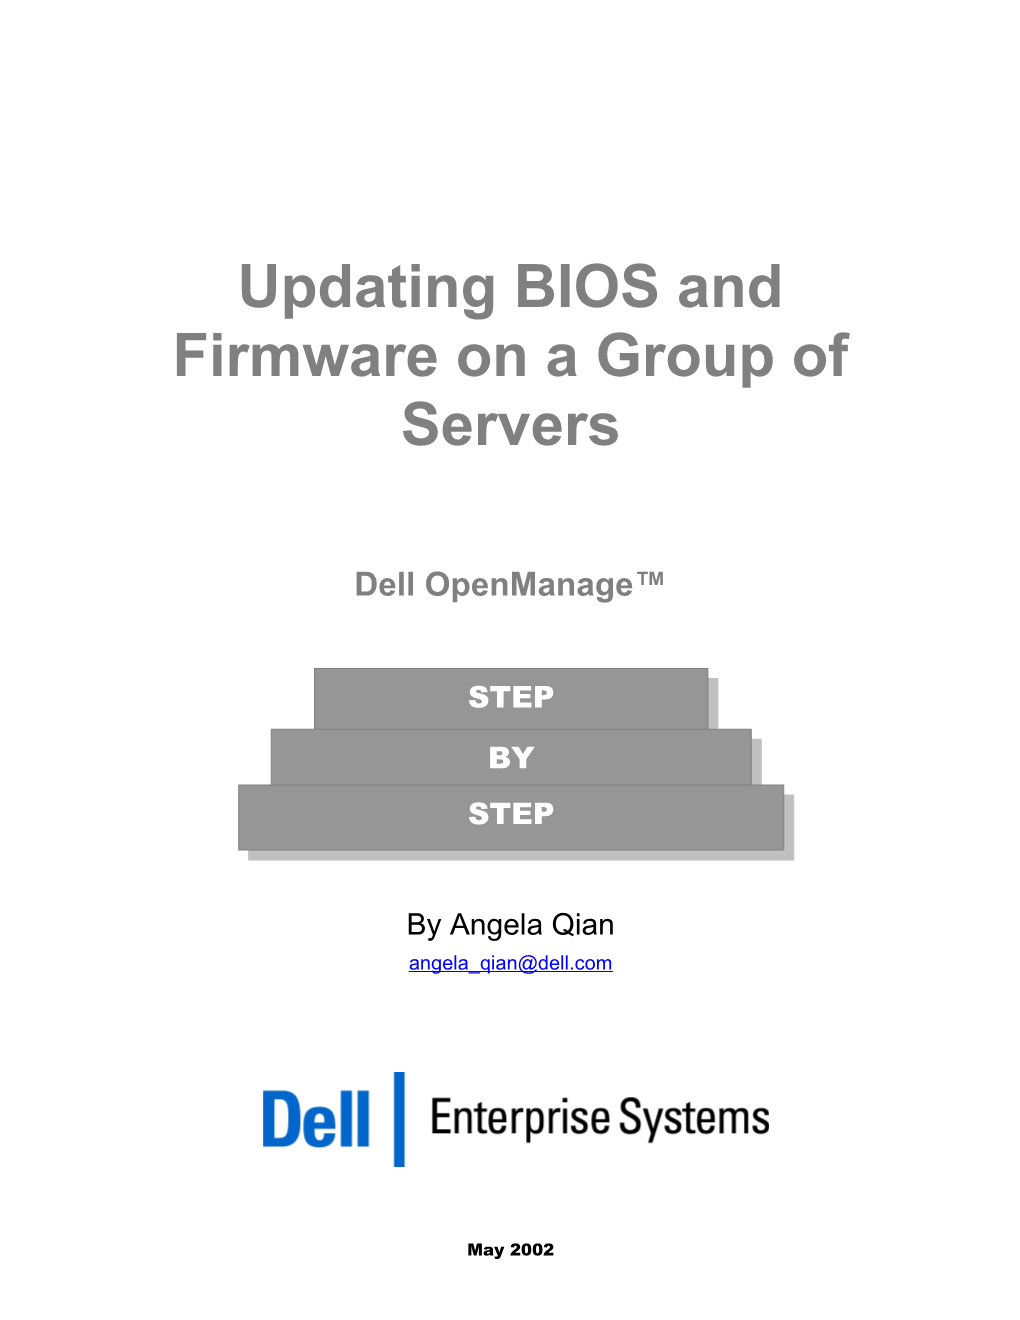 Updating BIOS and Firmware on a Group of Servers